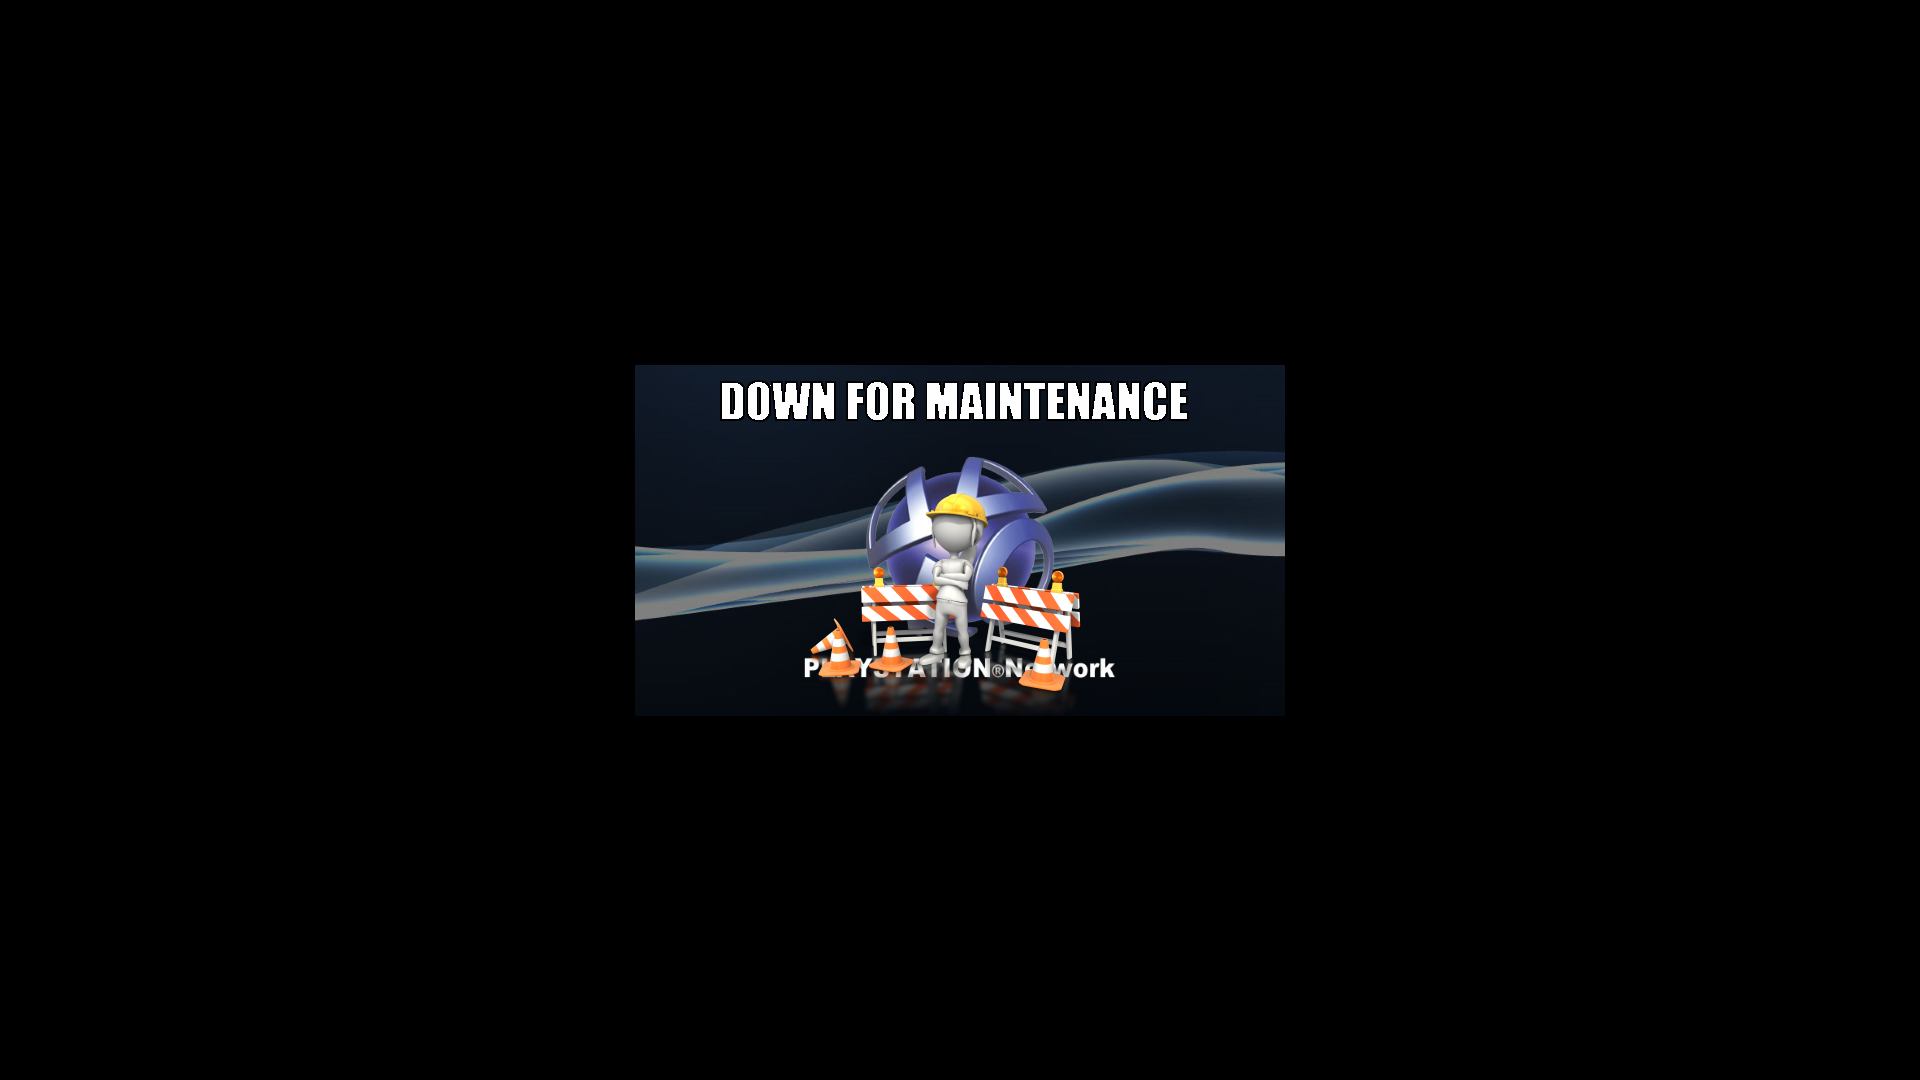 PlayStation Network down for maintenance